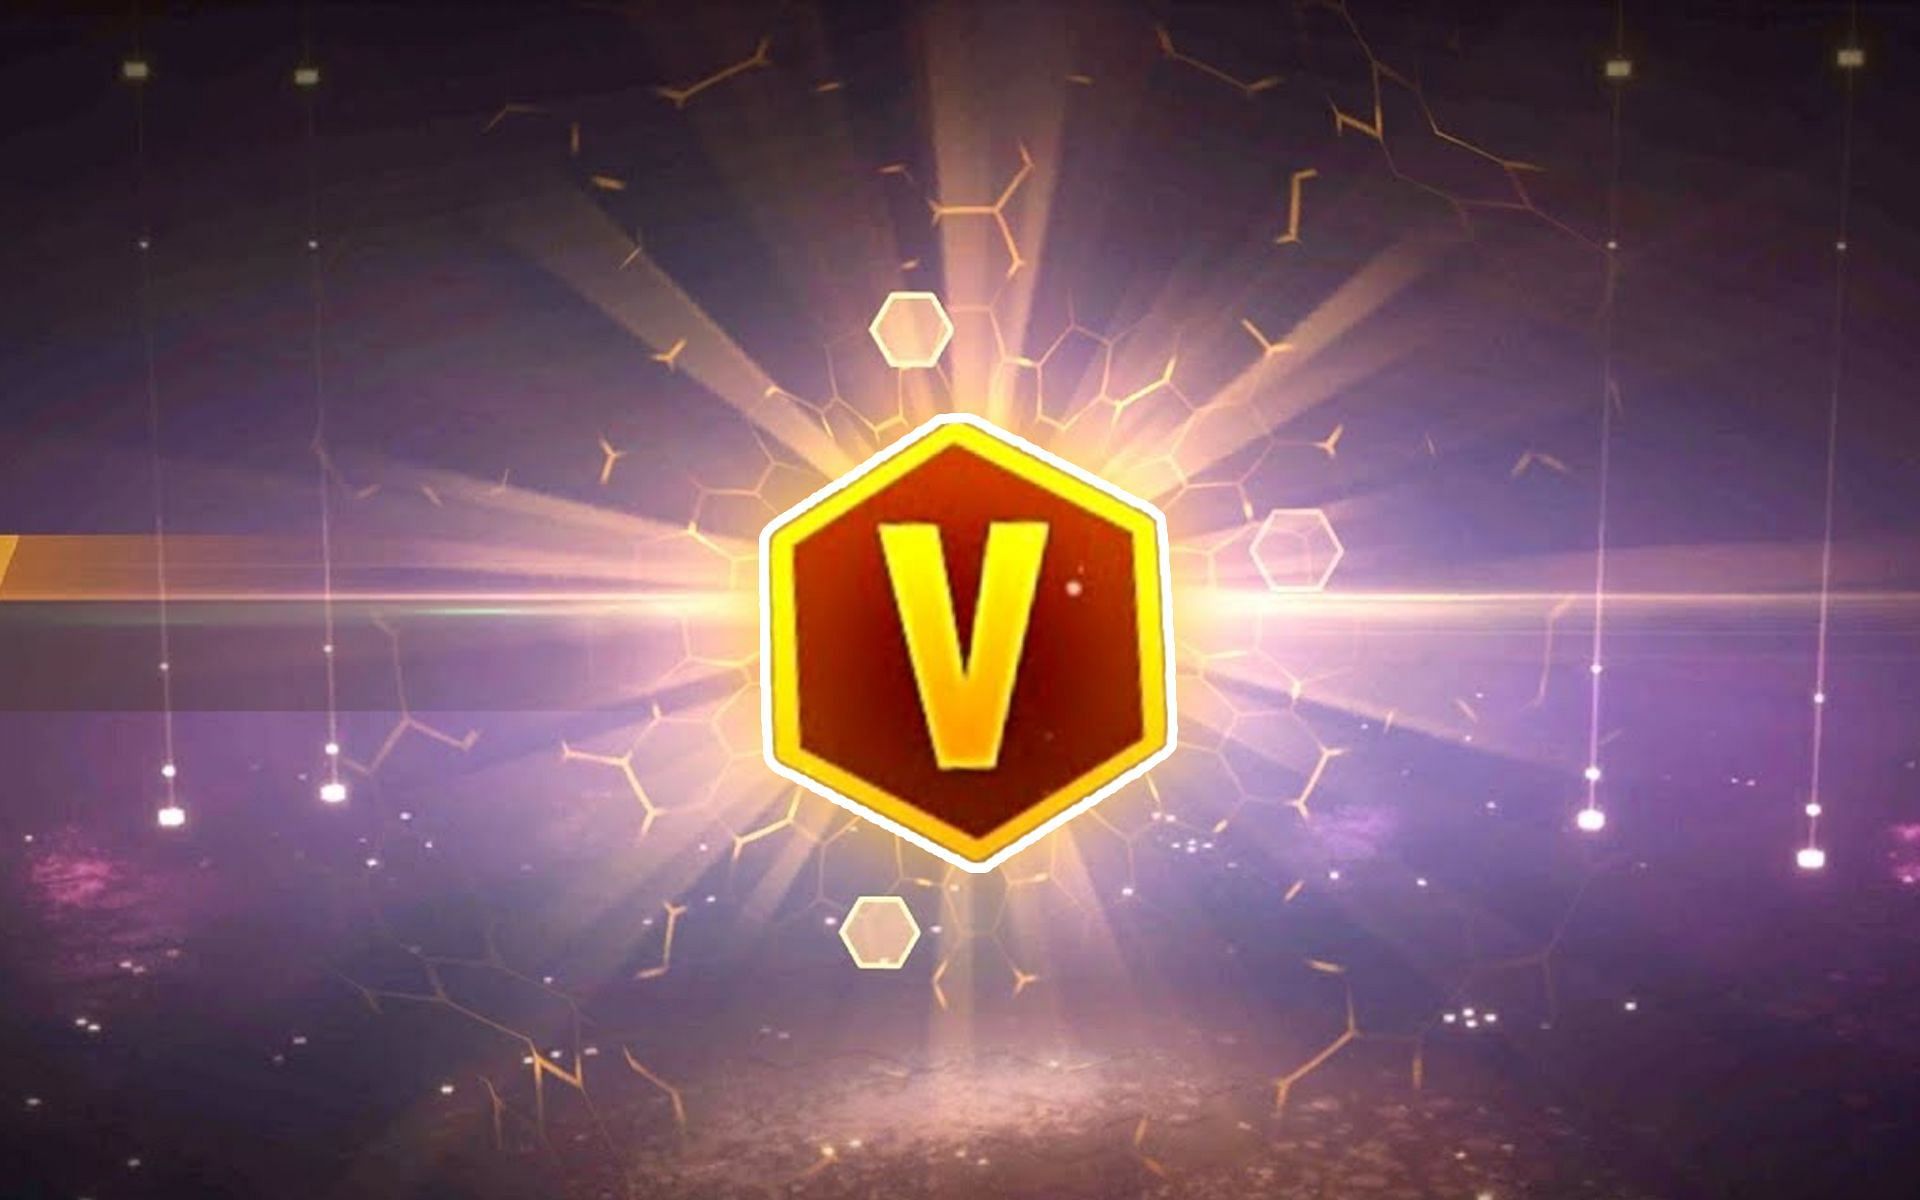 Members of the Partner Program are provided with the V badge (Image via Free Fire)